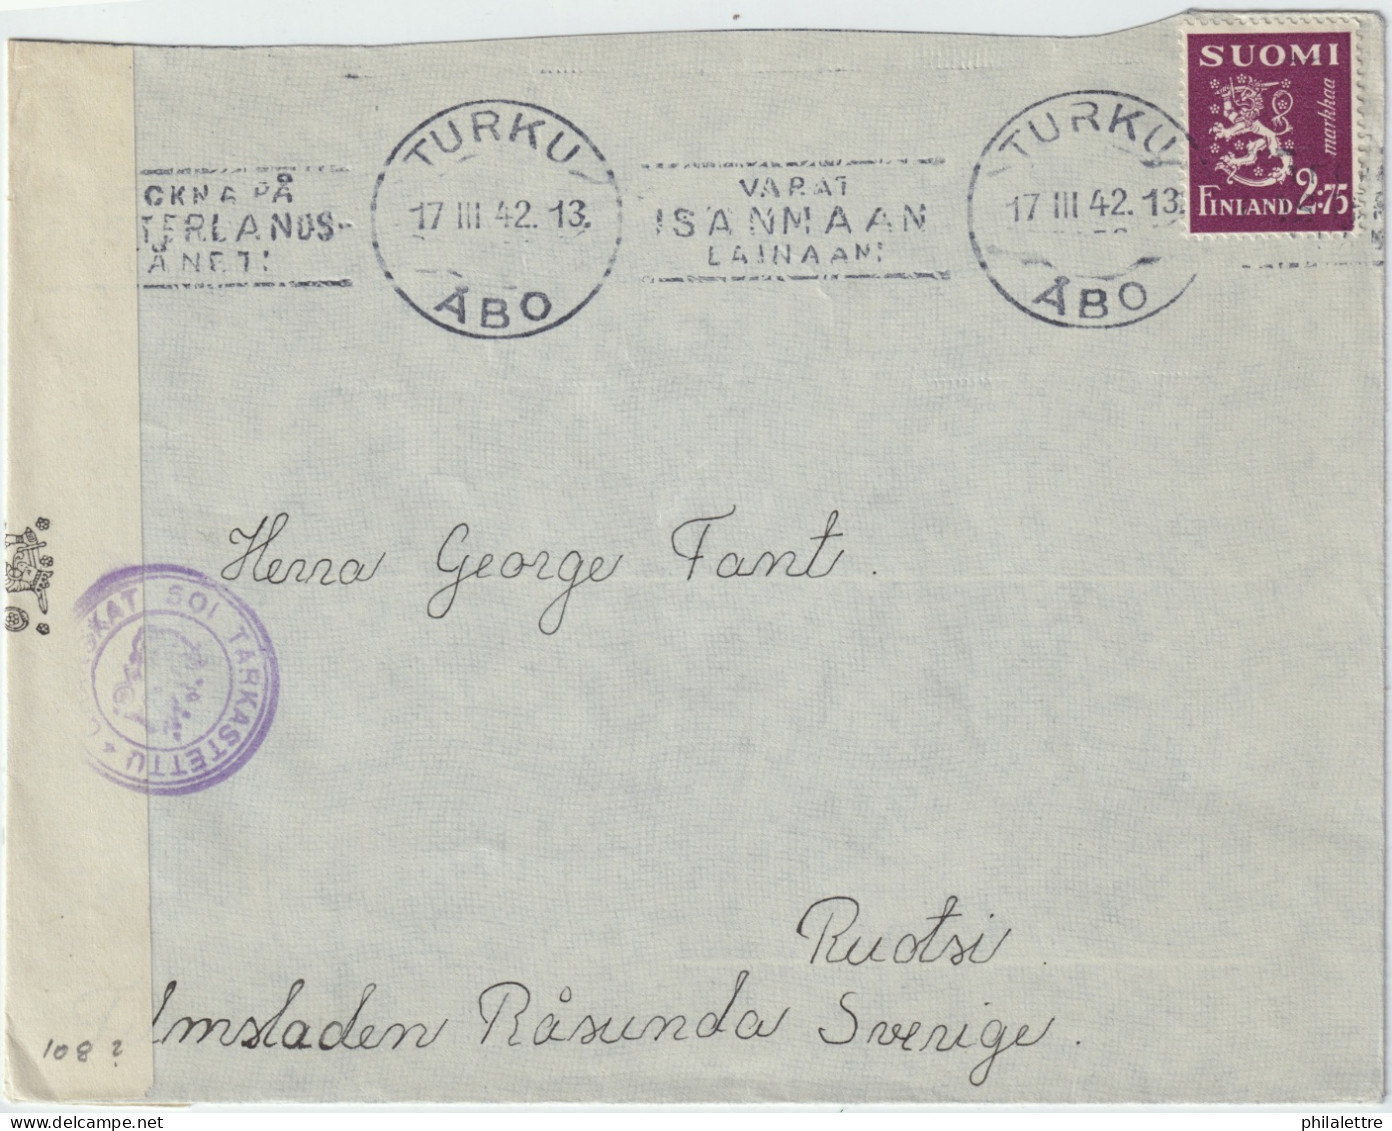 FINLAND - 1942 - Censored Cover From TURKU / ÅBO To Råsunda, Sweden Franked 2.75Mk - Covers & Documents